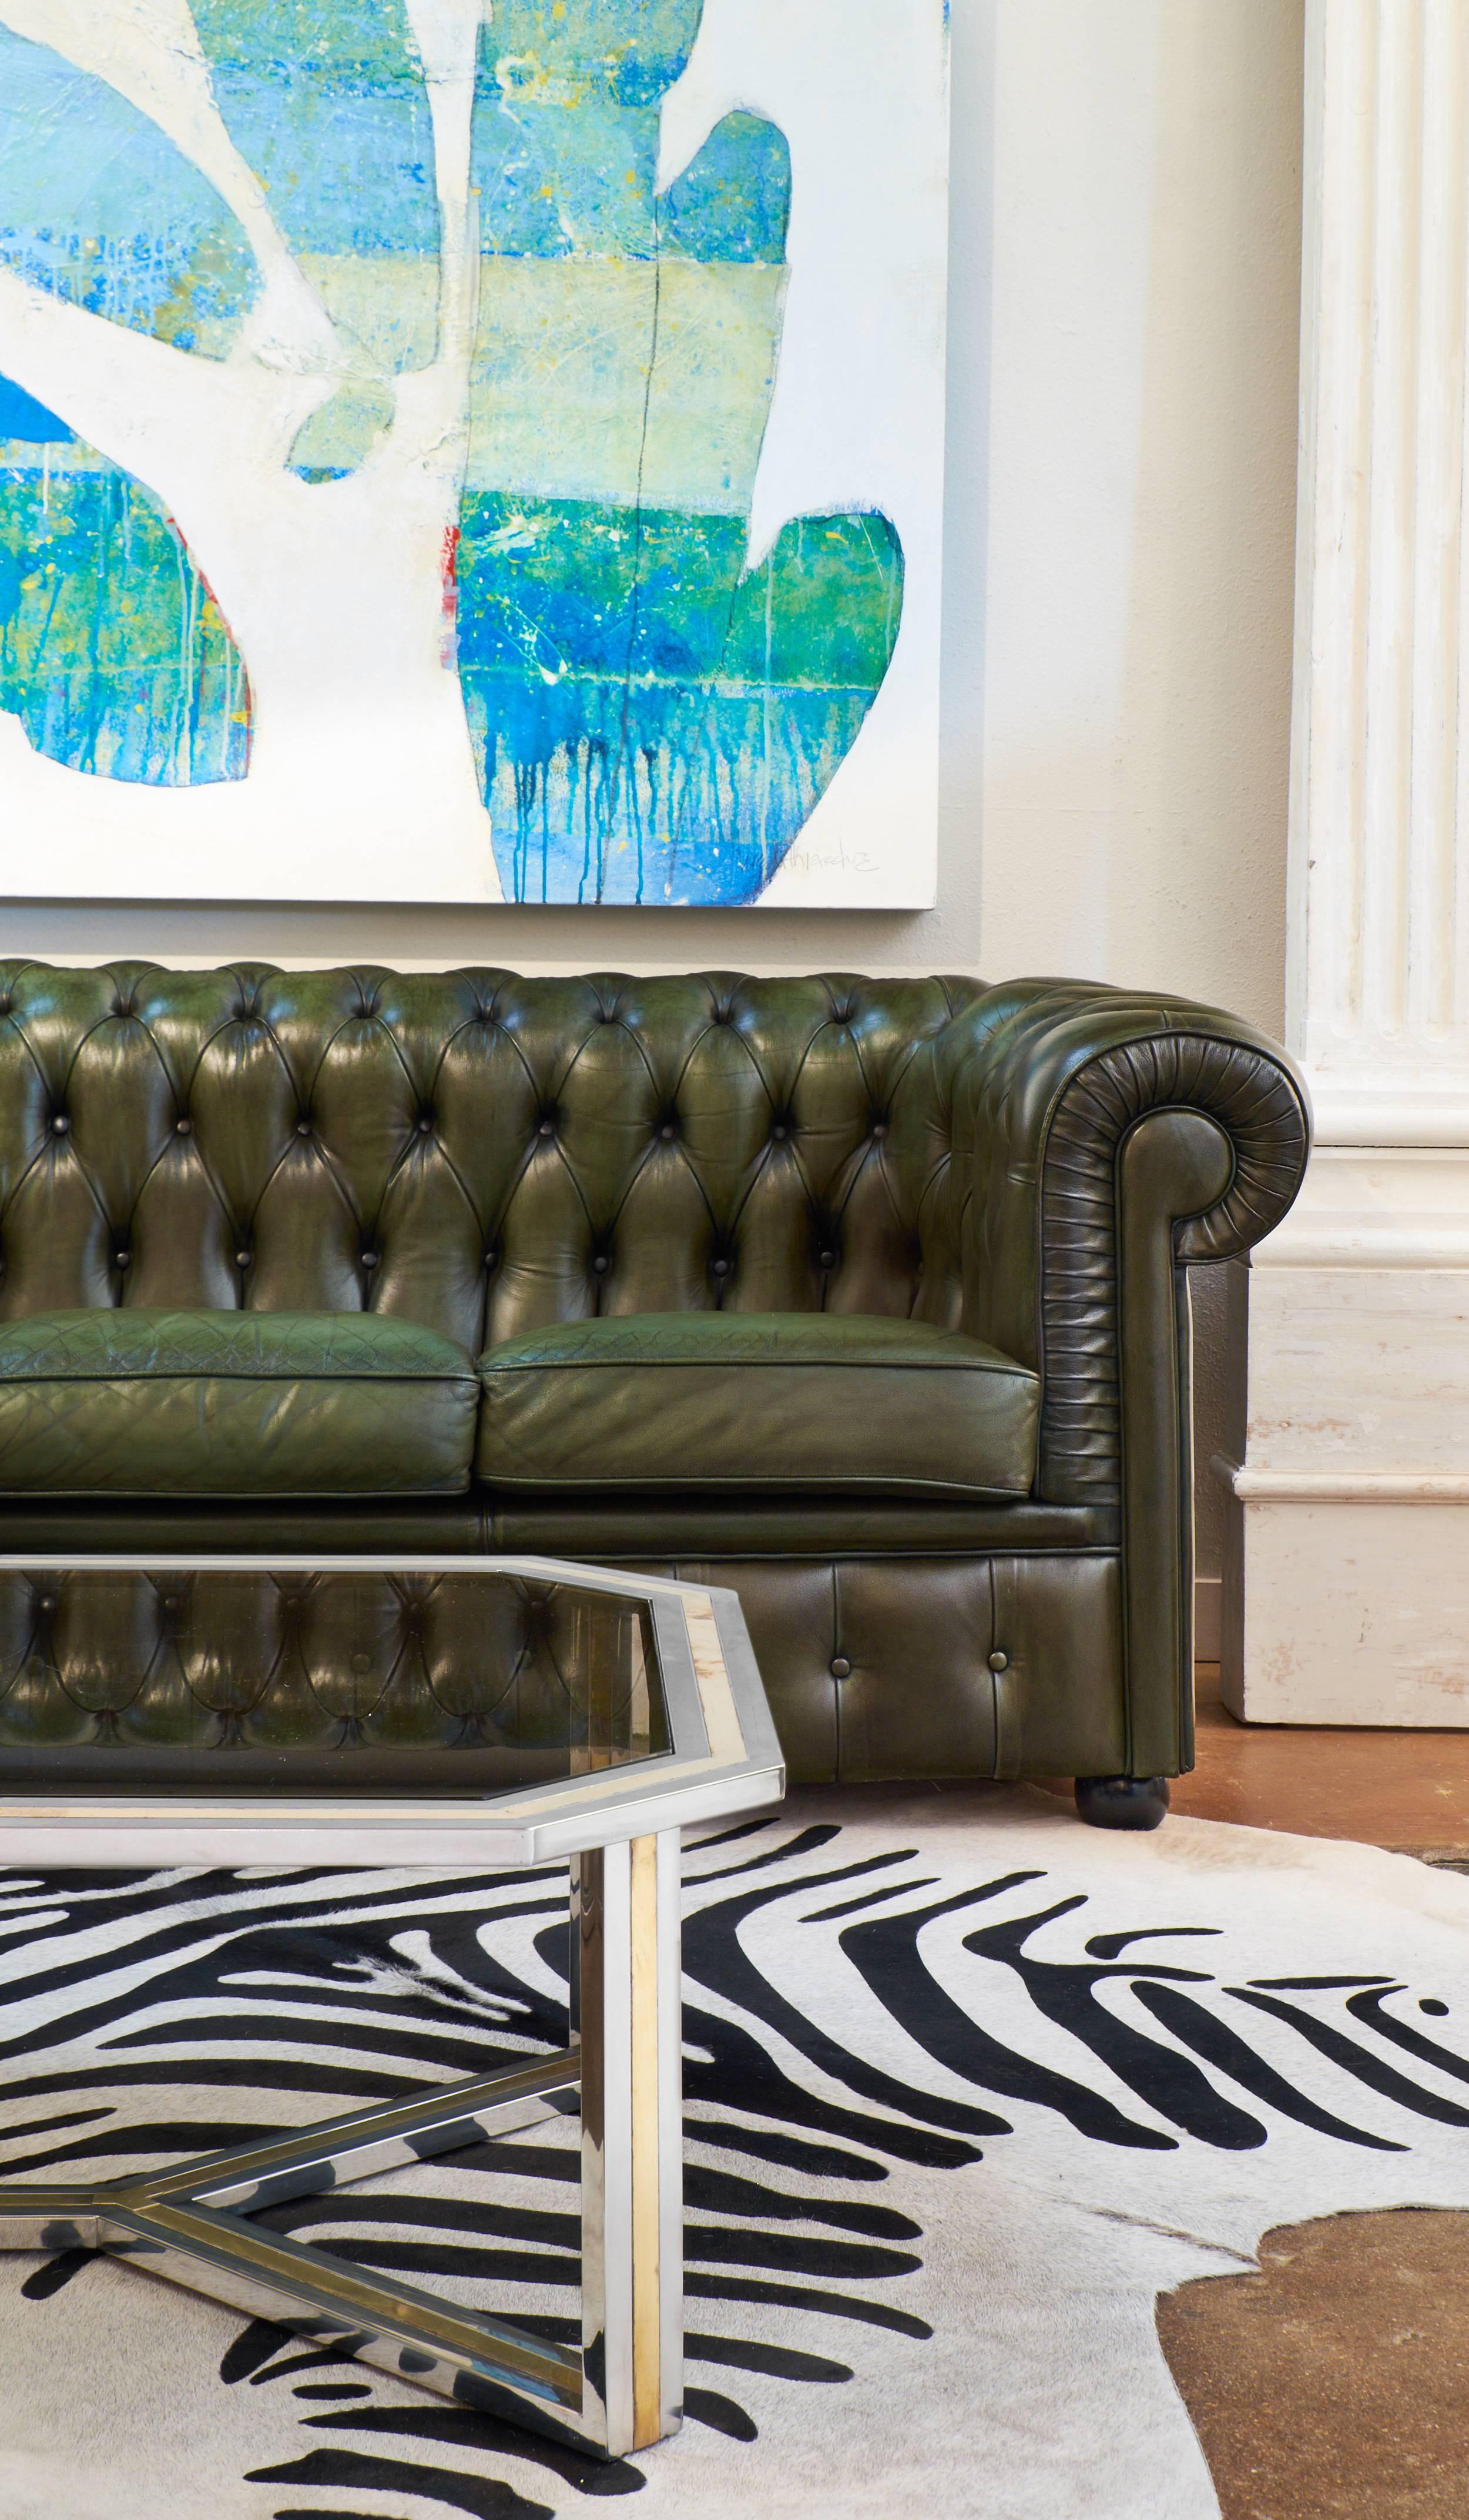 Vintage English Chesterfield sofa in green or bronze color with lustrous and soft tufted leather upholstery. We loved the beautiful color of the leather, the perfect proportions of the piece and above it all its comfort.